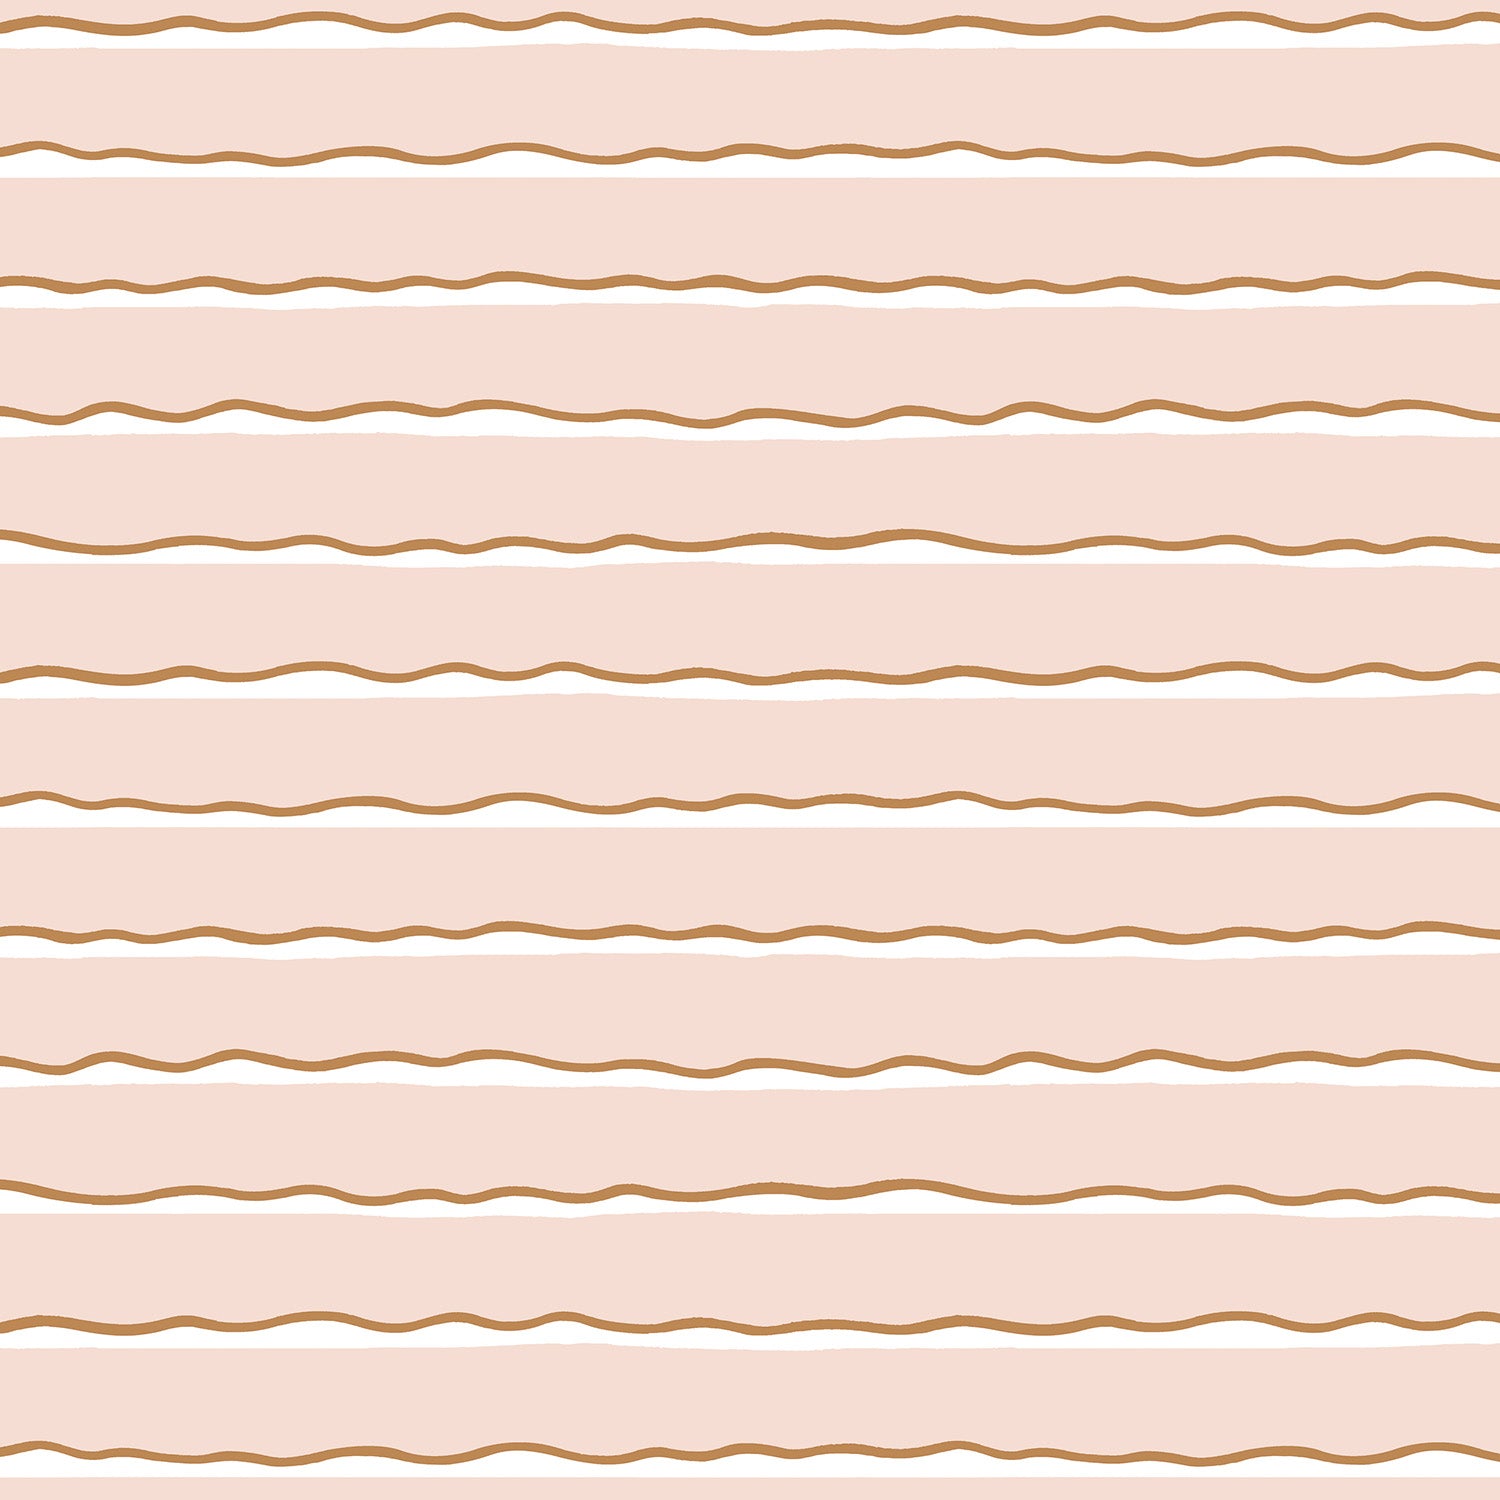 Detail of wallpaper in an undulating stripe pattern in pink, white and gold.